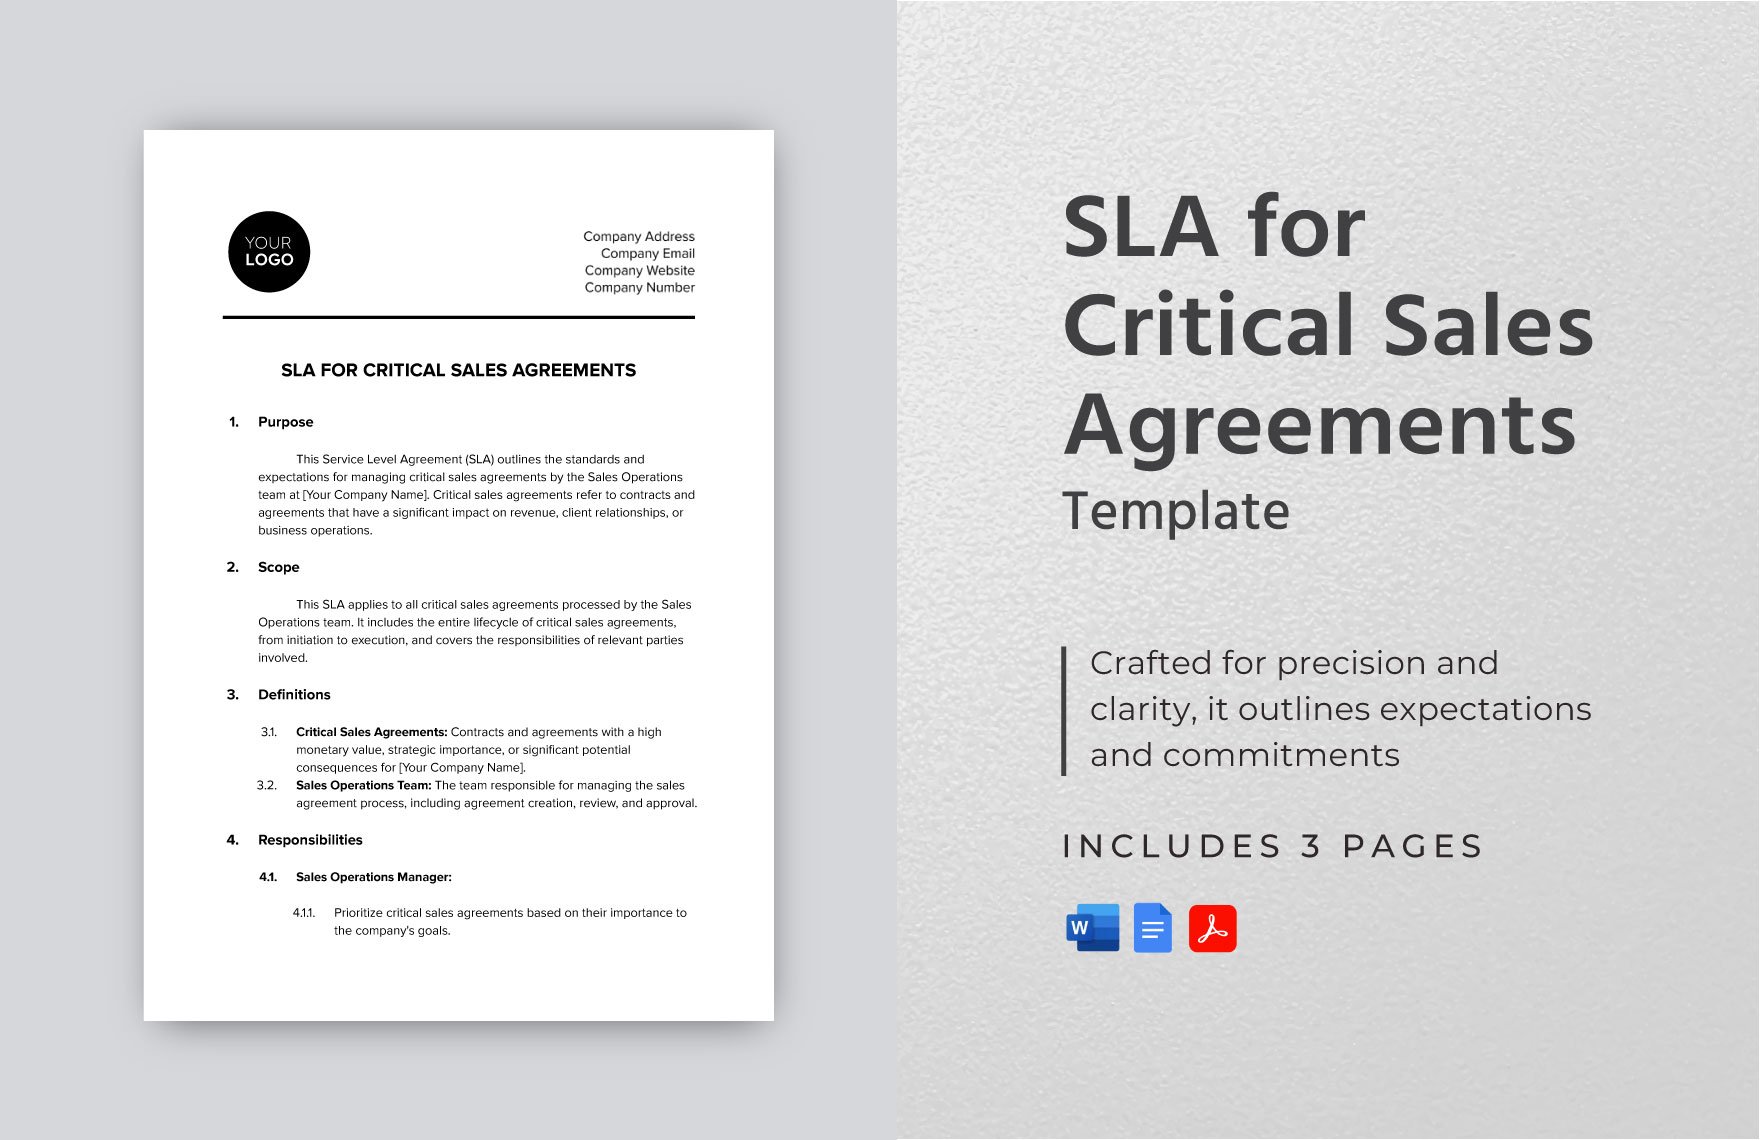 SLA for Critical Sales Agreements Template